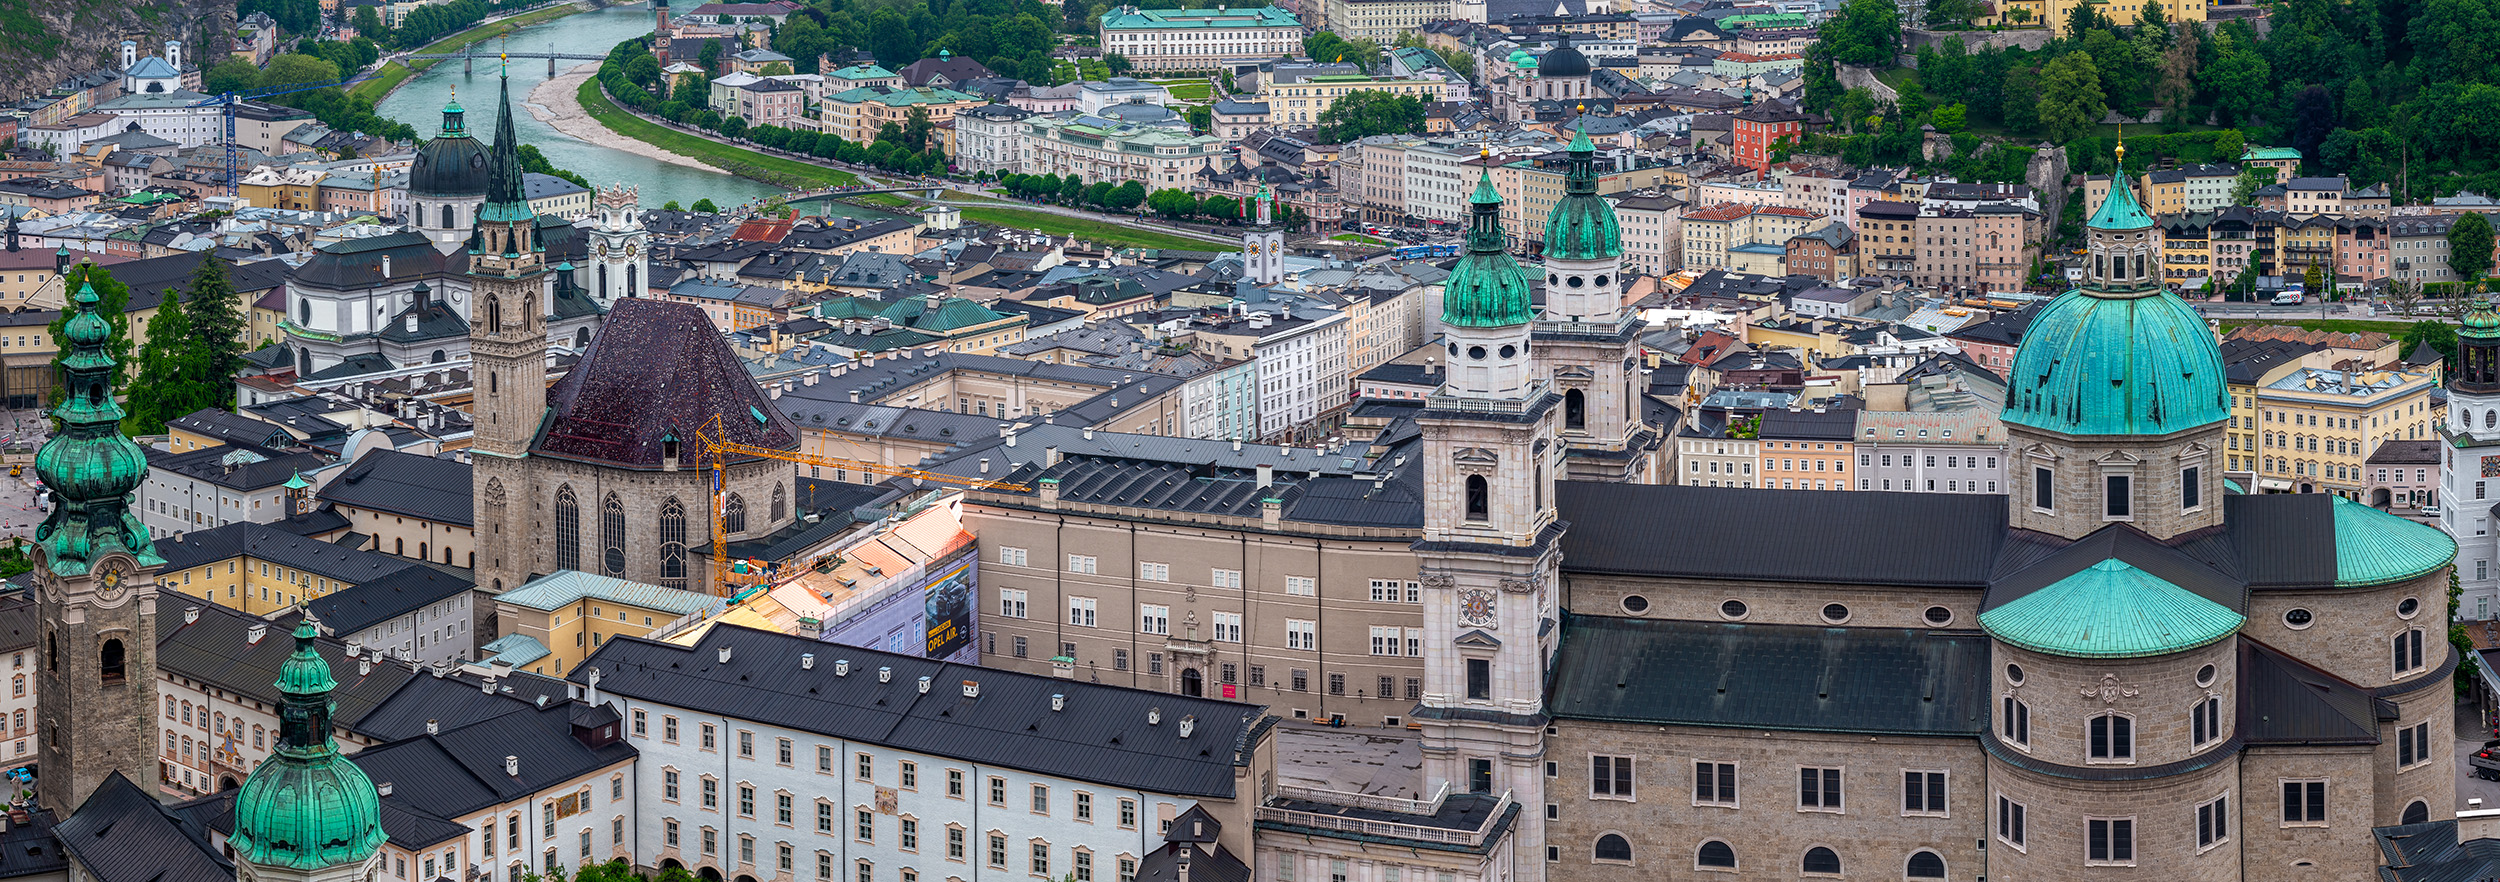 "Salzburg's Rooftop Symphony" presents a mesmerizing stitched panoramic view captured from the vantage point of the castle, offering...